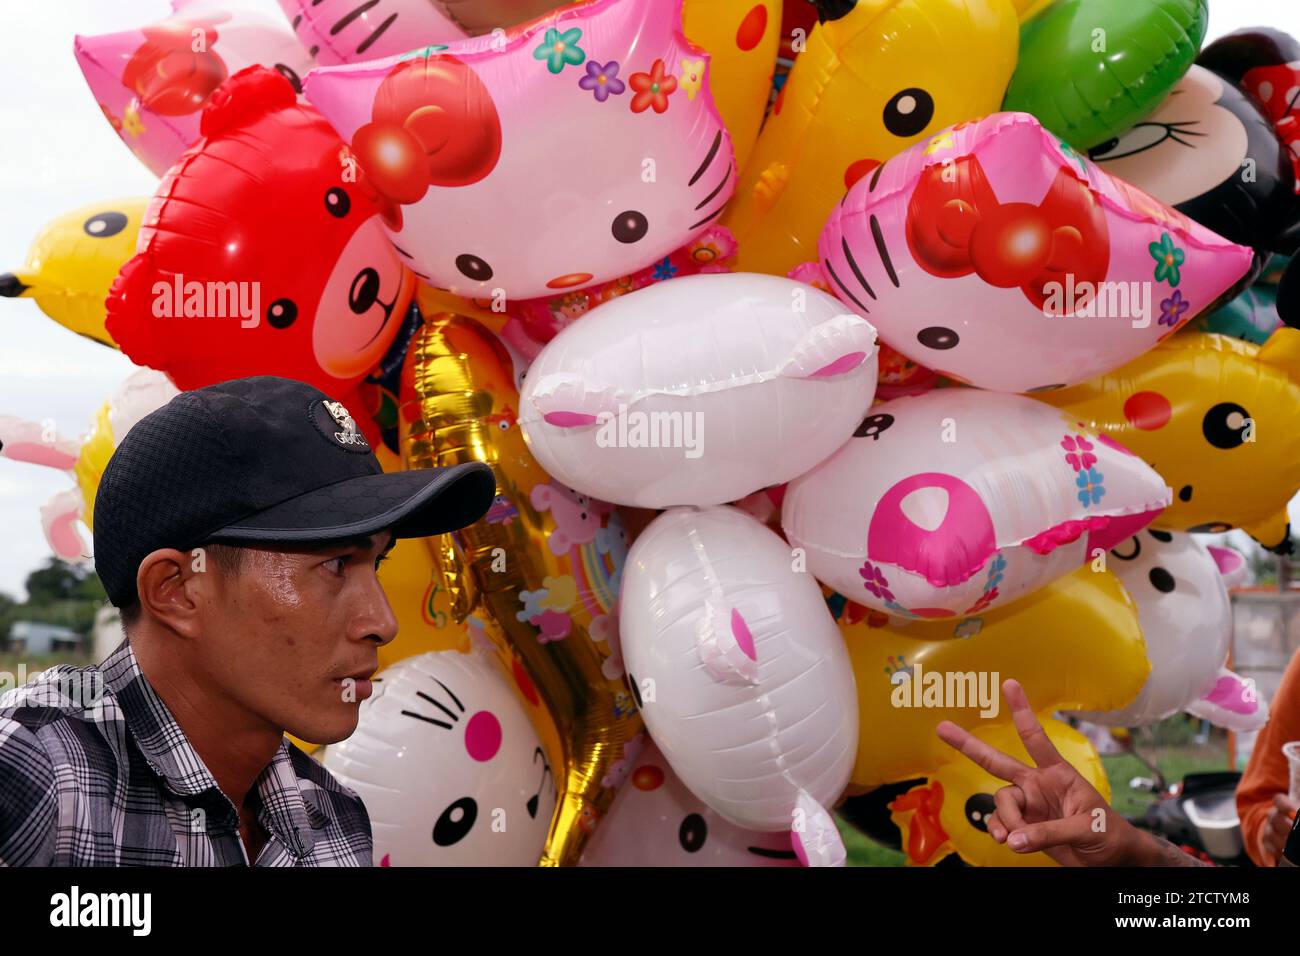 Street scene with local vendor carrying a bunch of colourful balloons. Stock Photo